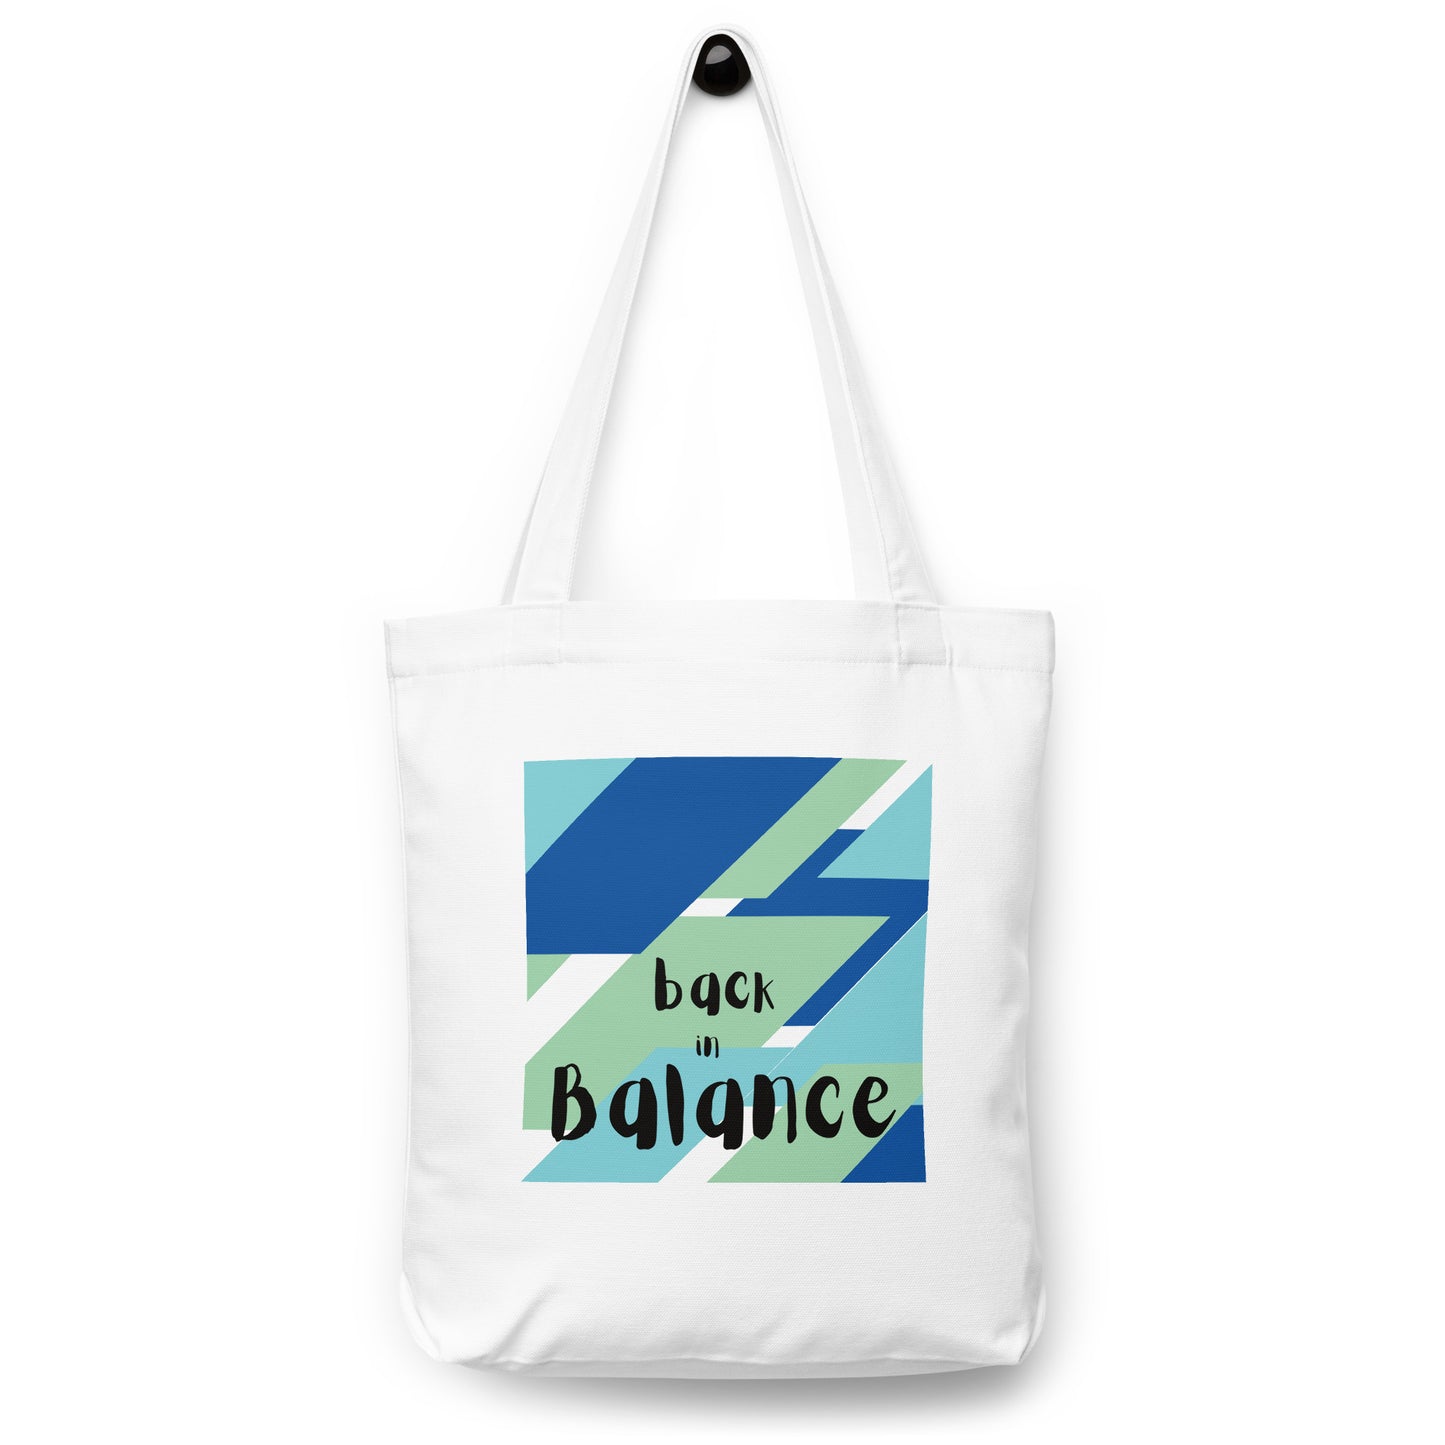 Back in Balance Cotton tote bag